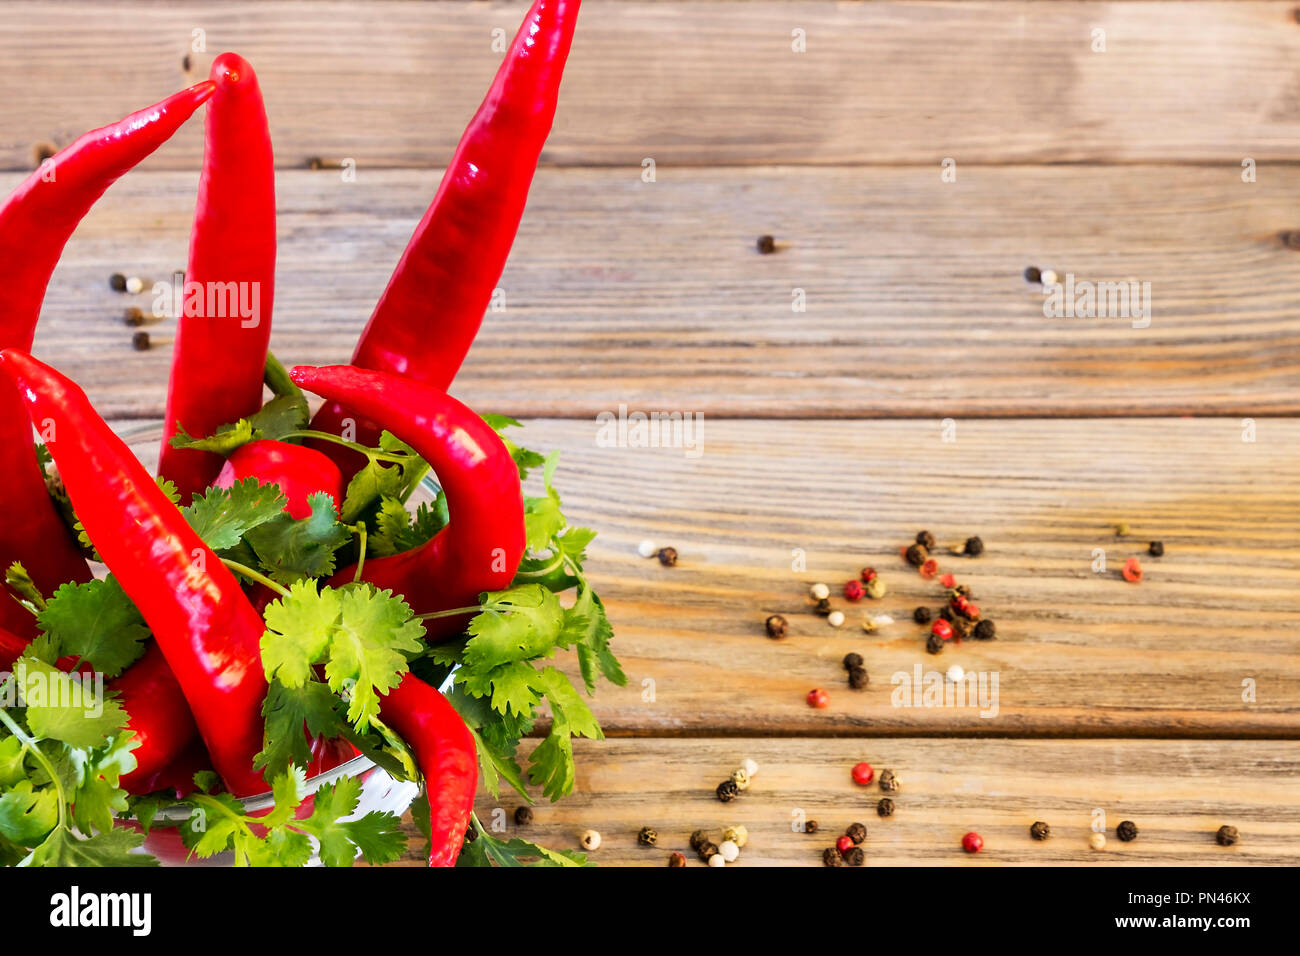 Red chili peper on wooden background Close up Stock Photo